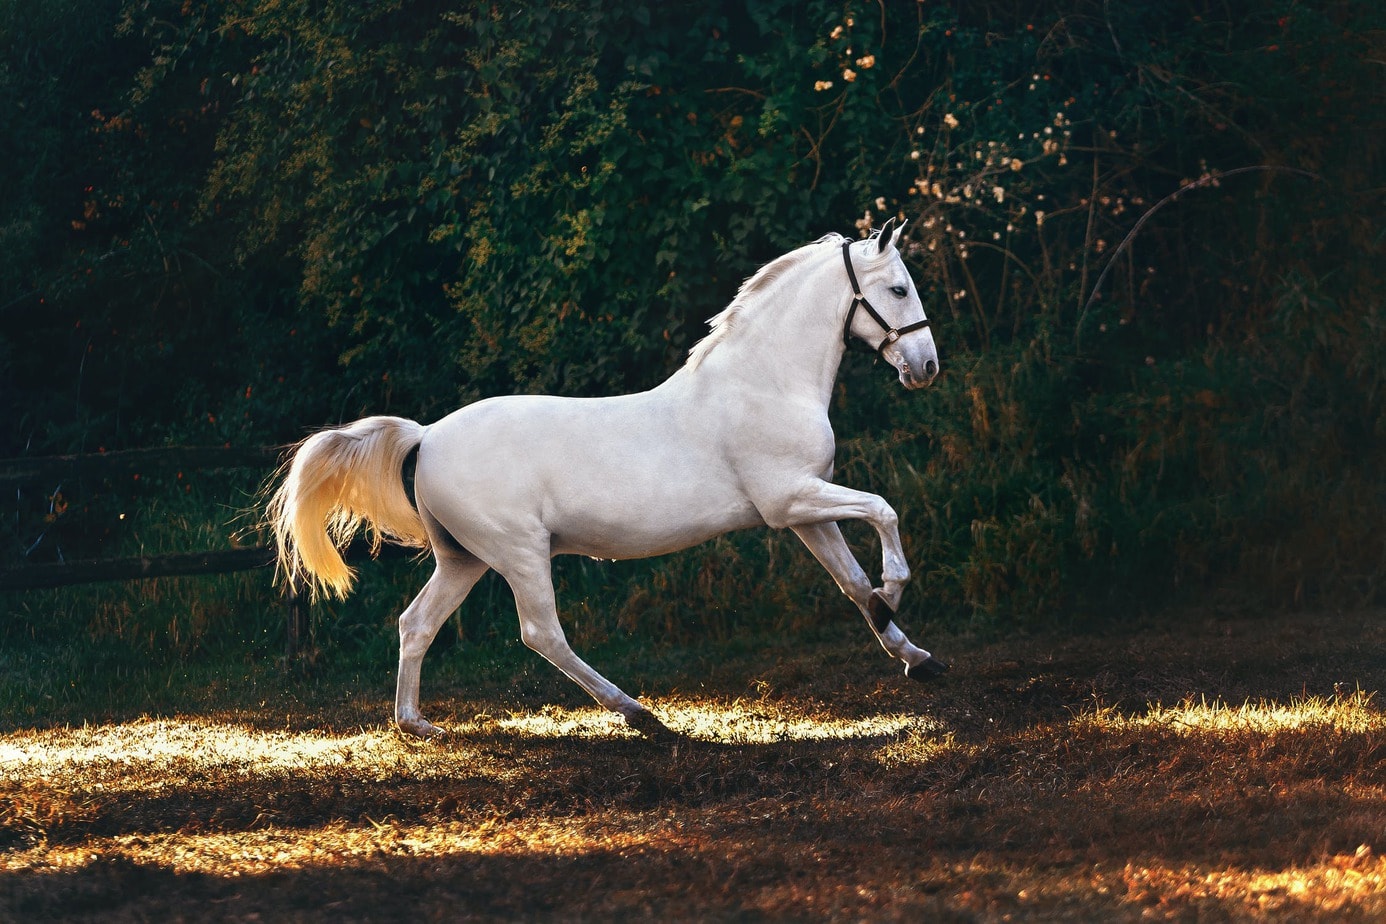 Beauty worth millions – the most expensive horse breeds in the world